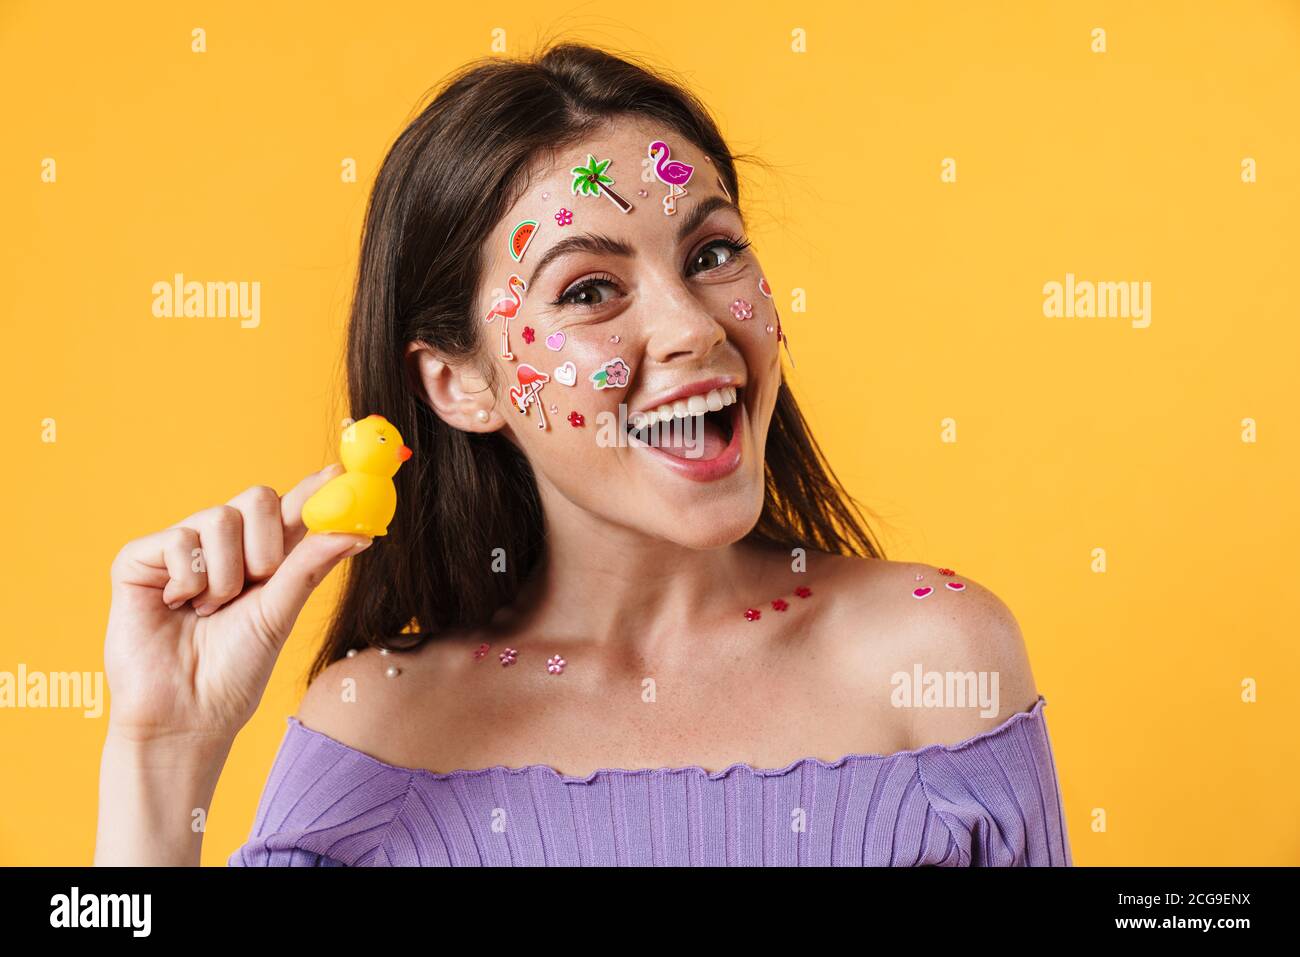 Image of young joyful woman with stickers on face holding rubber duck isolated over yellow background Stock Photo